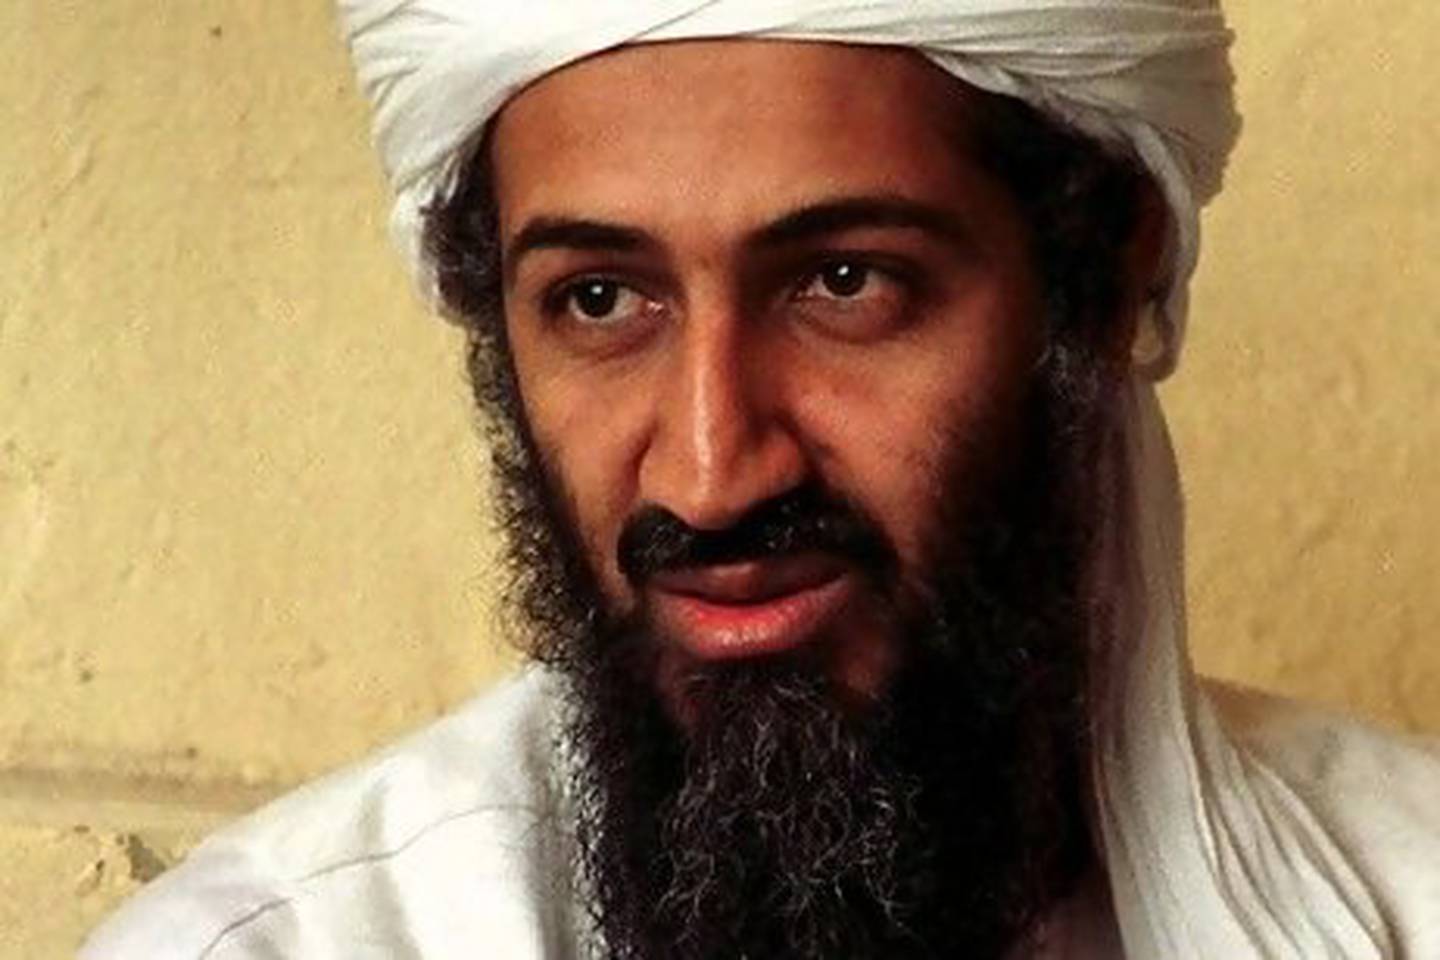 Osama bin Laden, the Al Qaeda leader who died in 2011. The head of MI6 has warned that the terrorist group could return, under Taliban protection, and launch mass-casualty attacks. Reuters